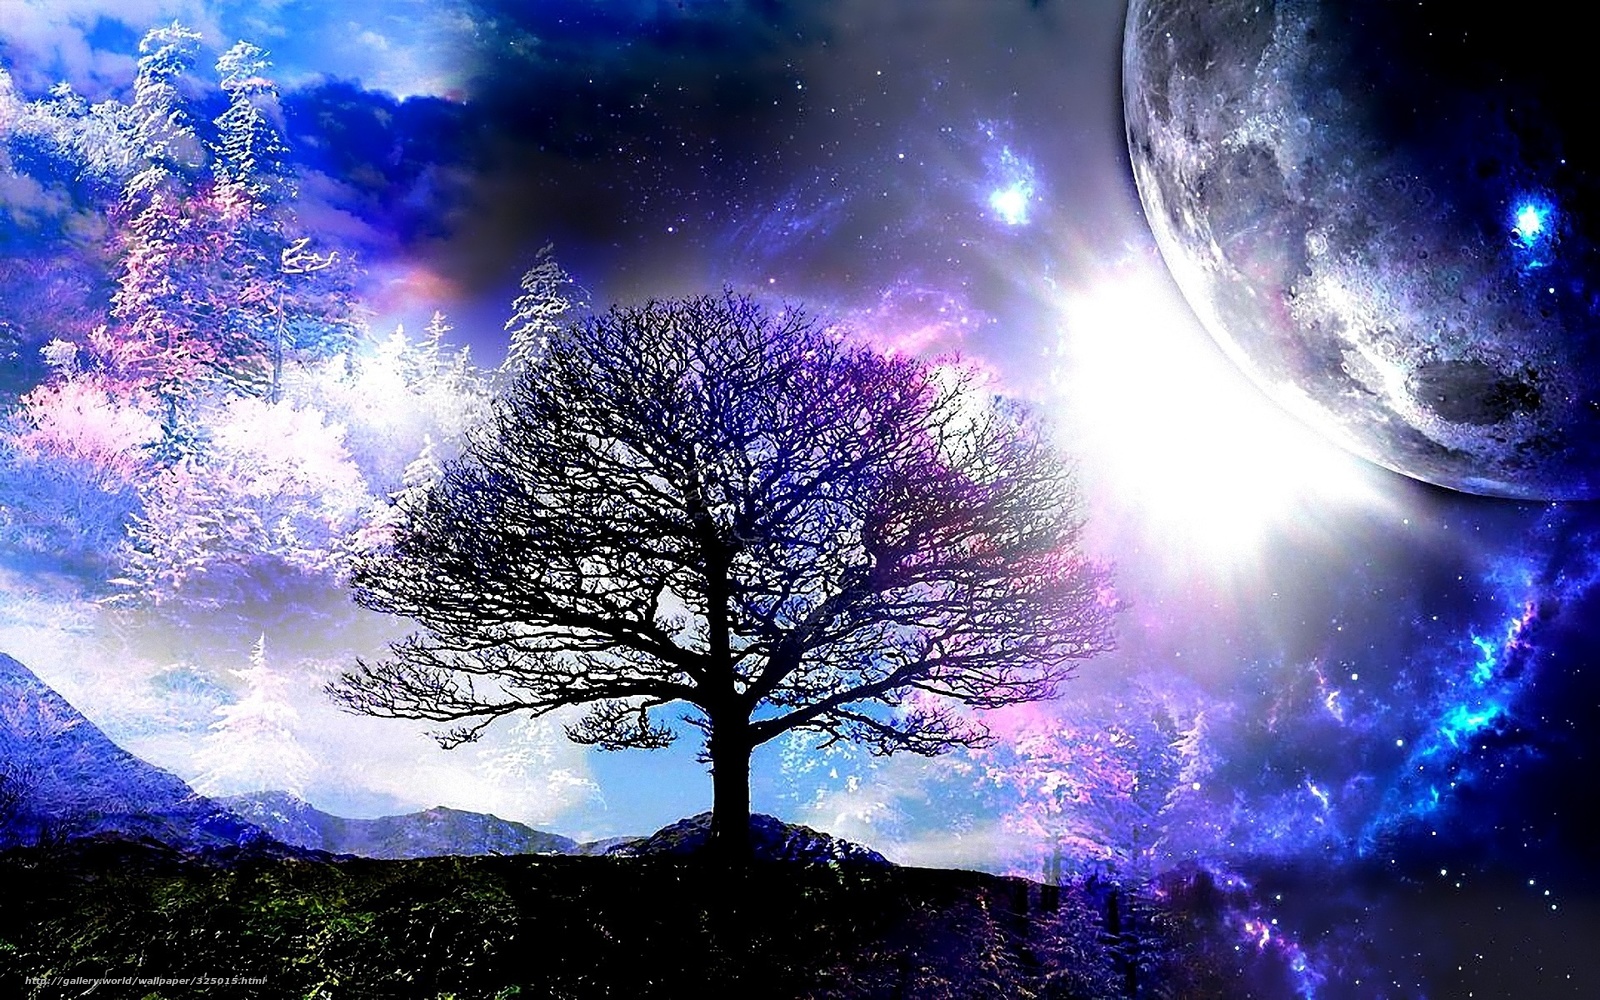 Tree Of Life Desktop Background Images amp Pictures   Becuo